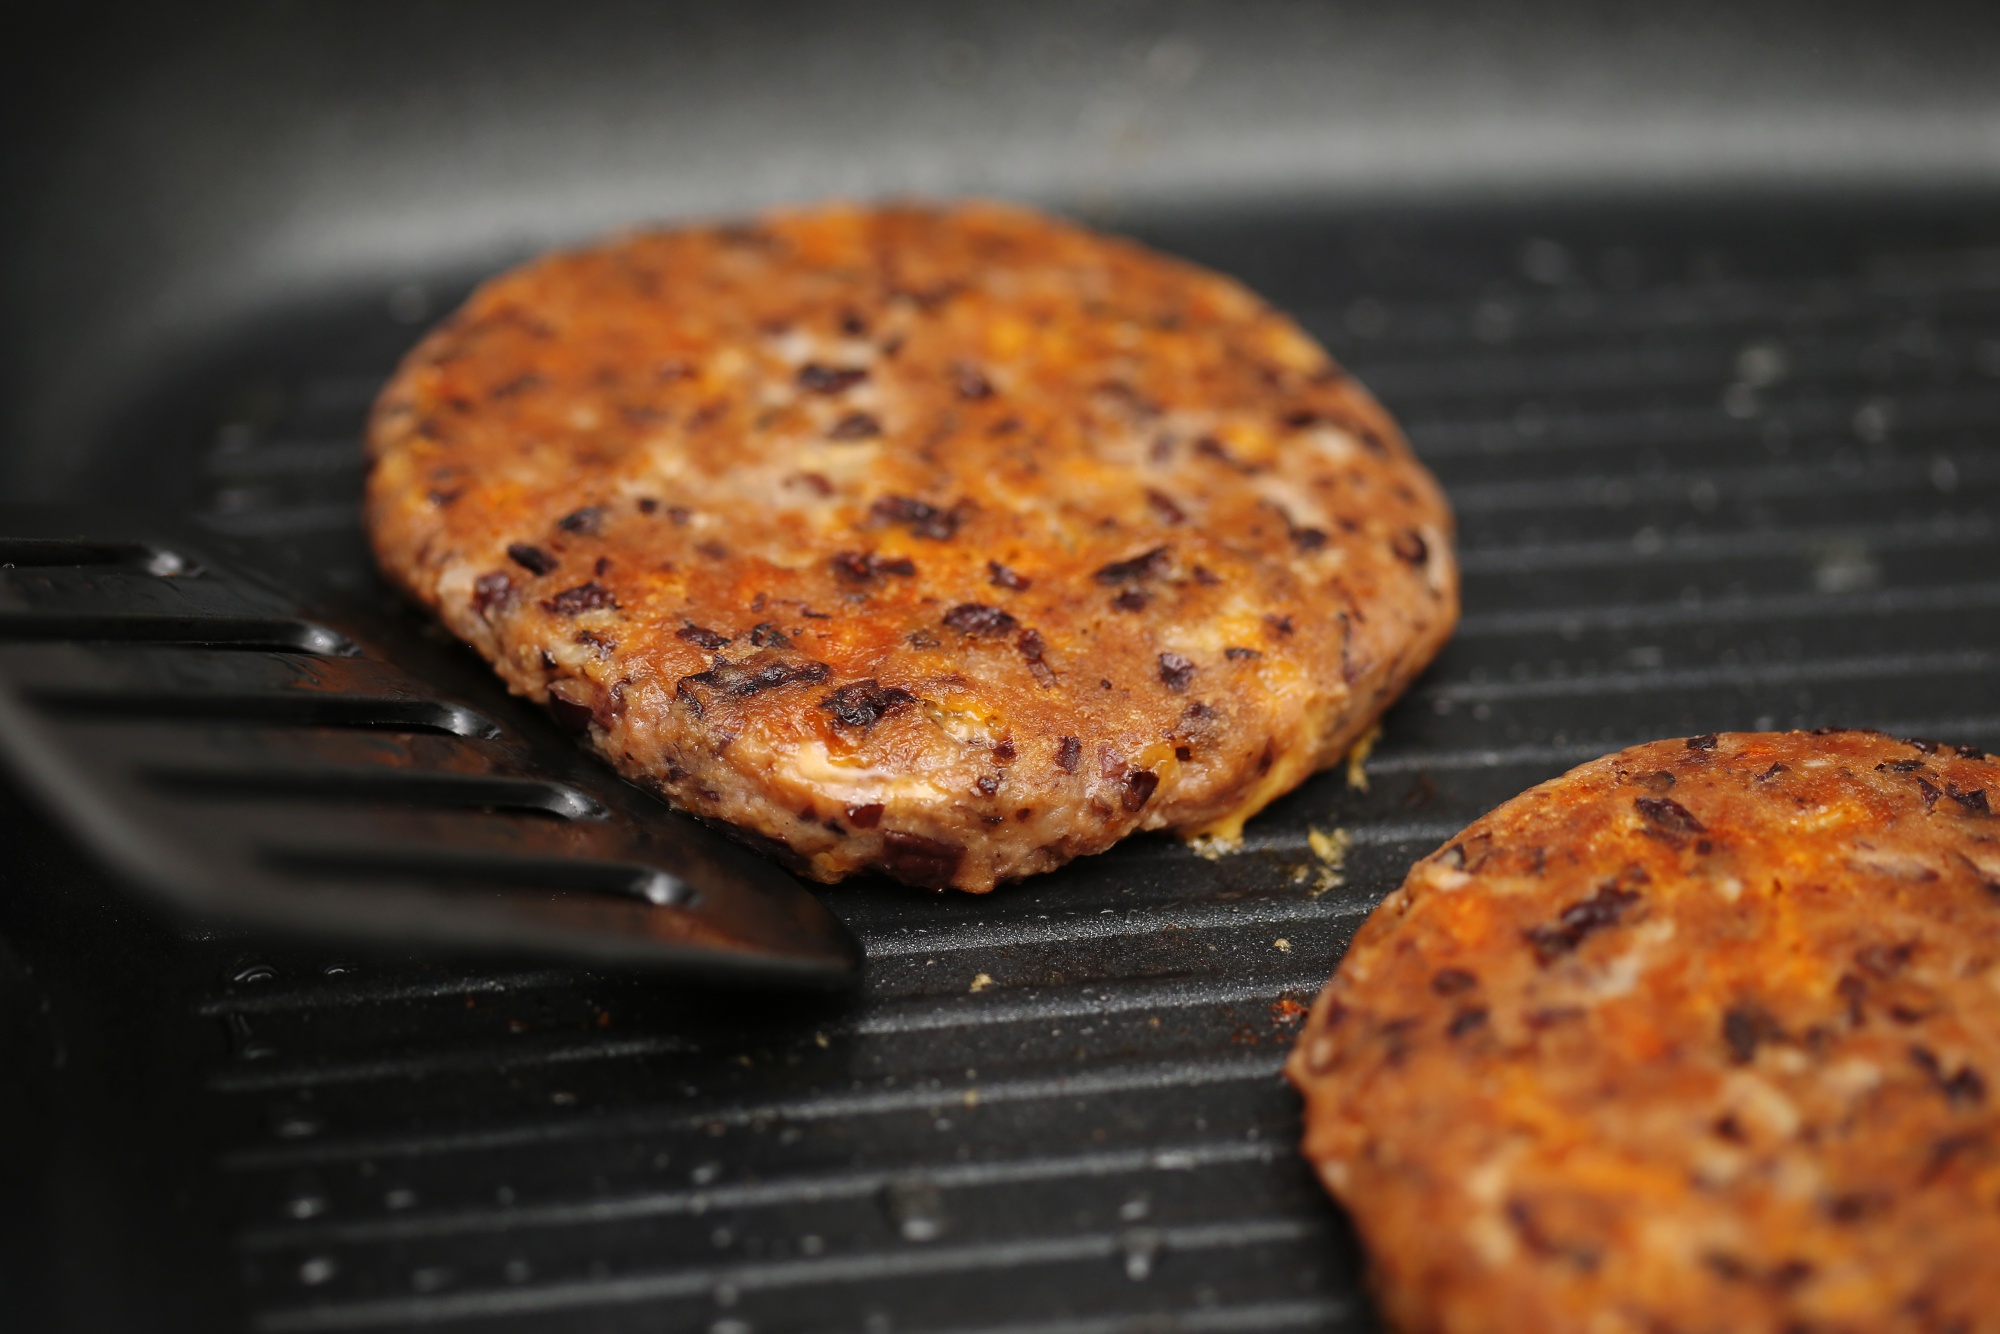 A vegetarian burger made with a canola protein powder.